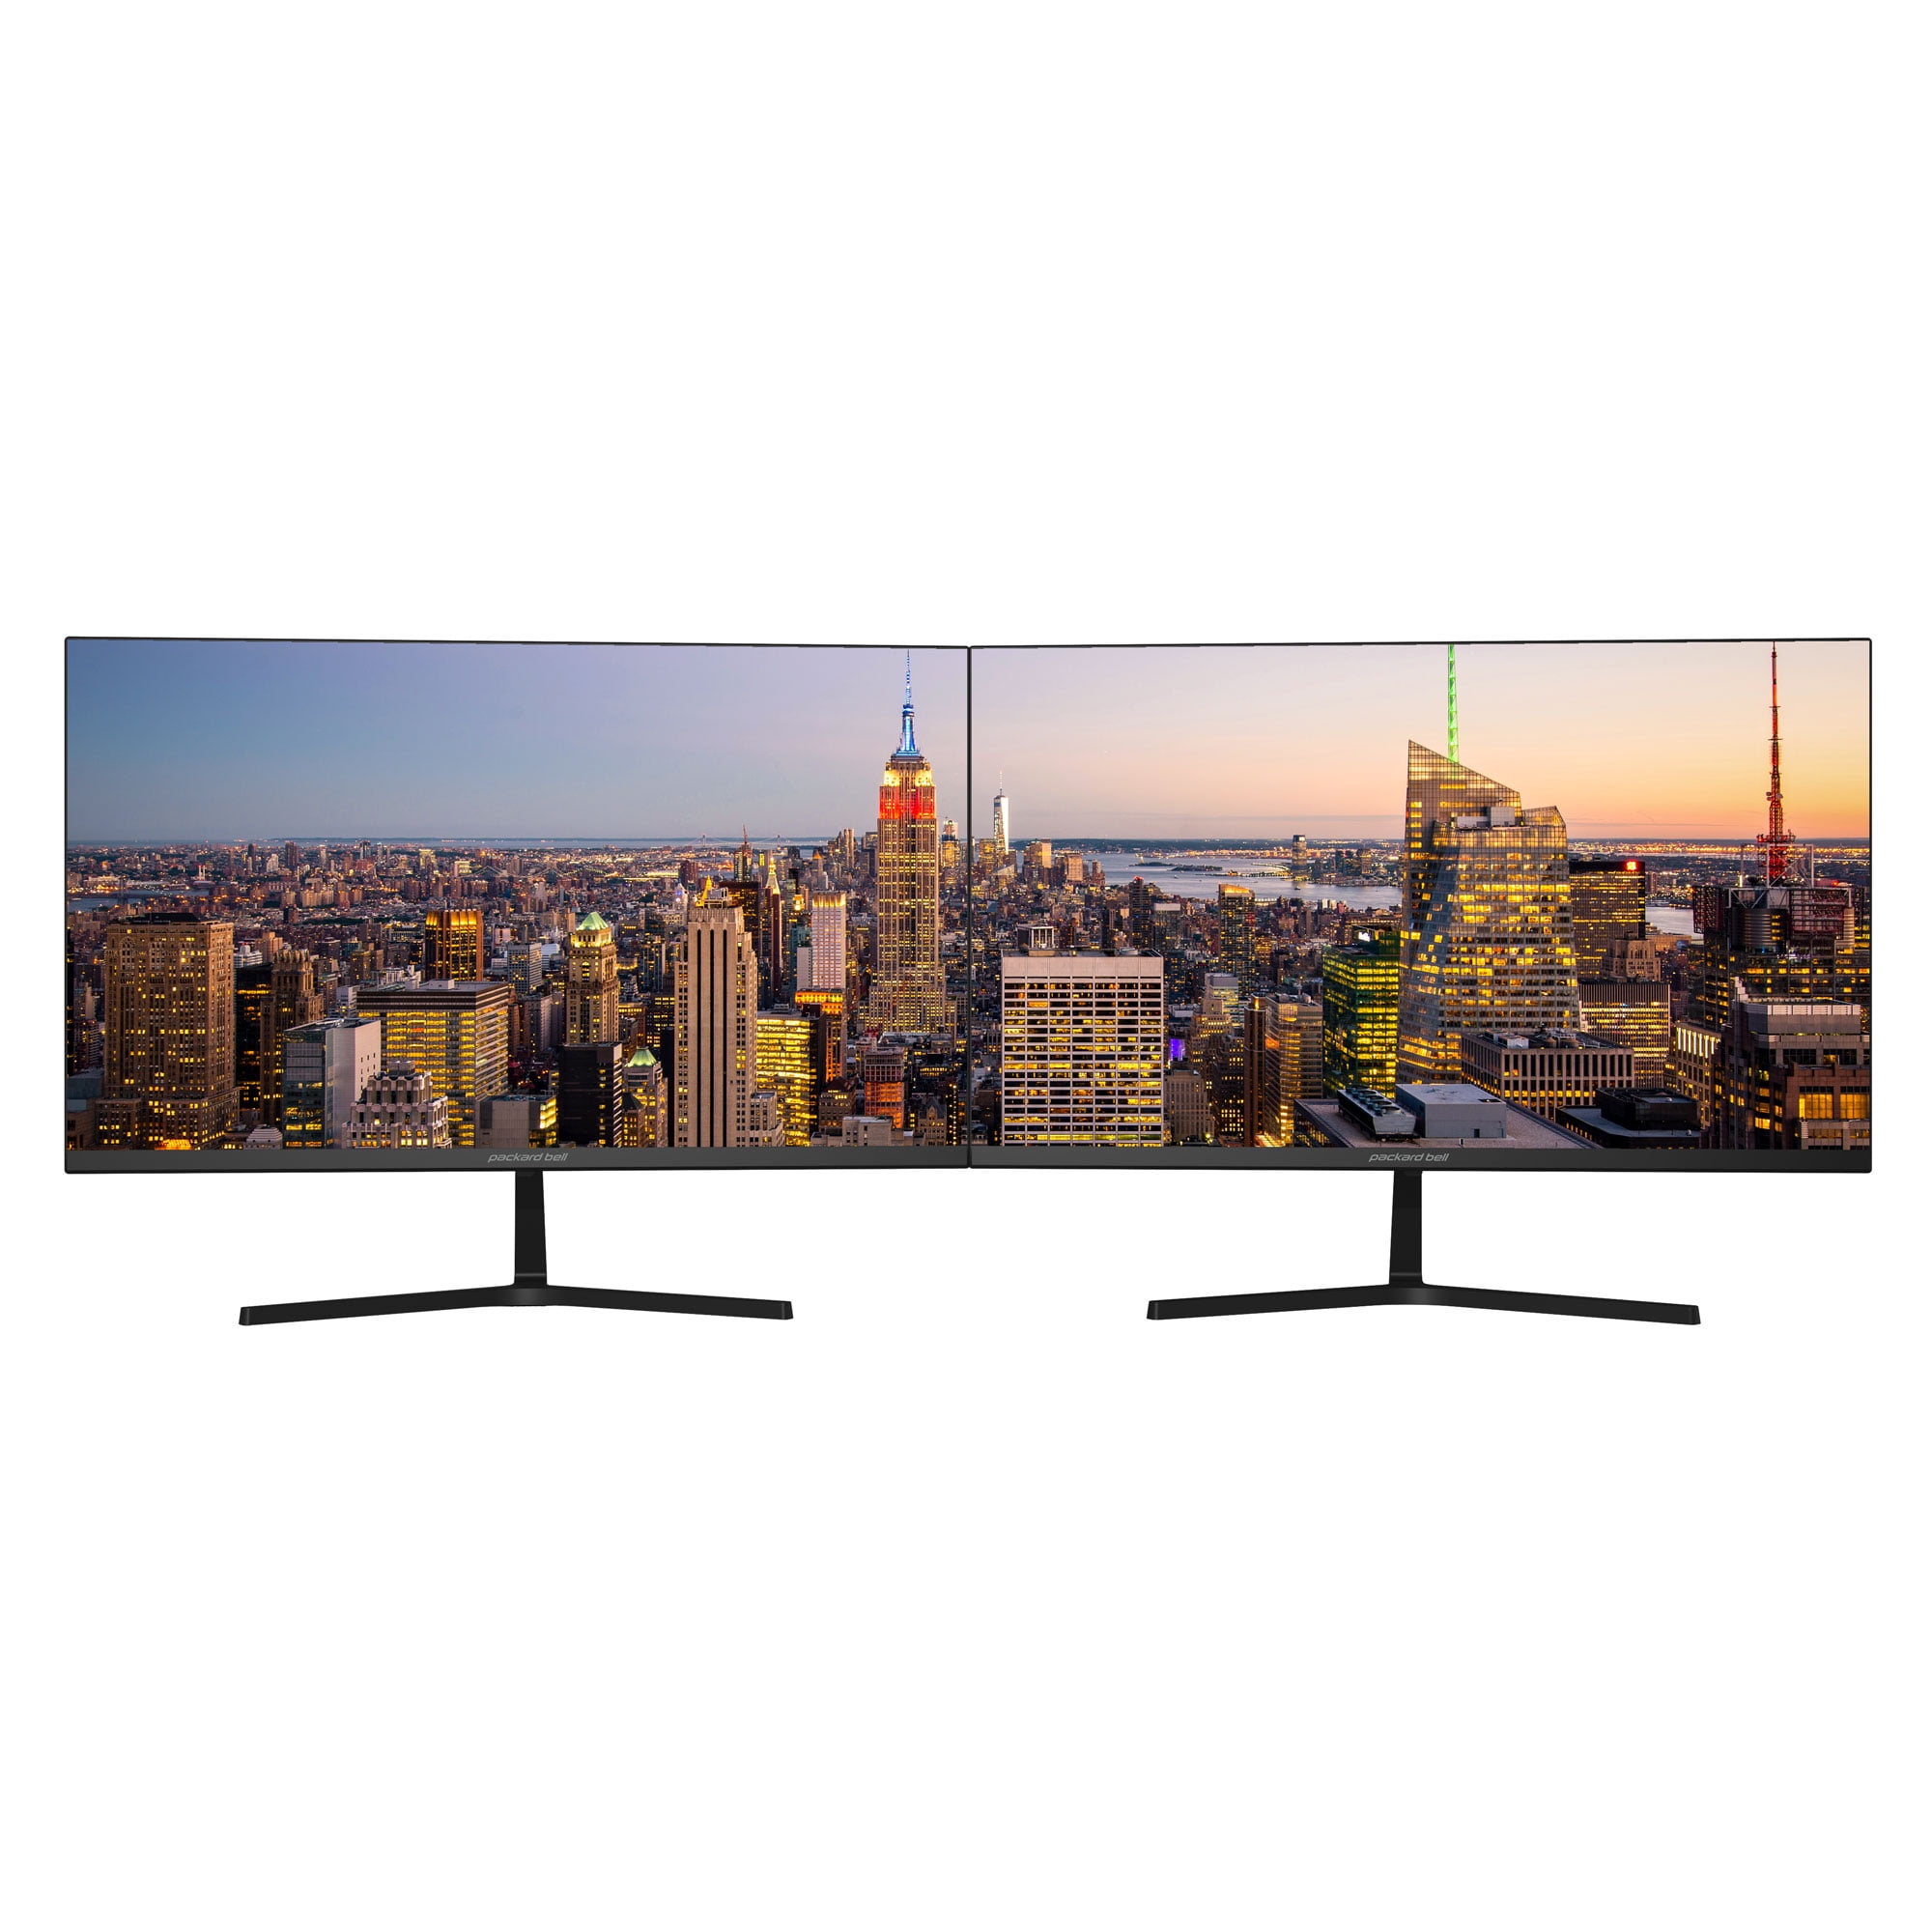 Dell S3222HN 32-inch FHD 1920 x 1080 at 75Hz Curved Monitor, 1800R  Curvature, 8ms Grey-to-Grey Response Time (Normal Mode),  Million  Colors, Black (Latest Model) 